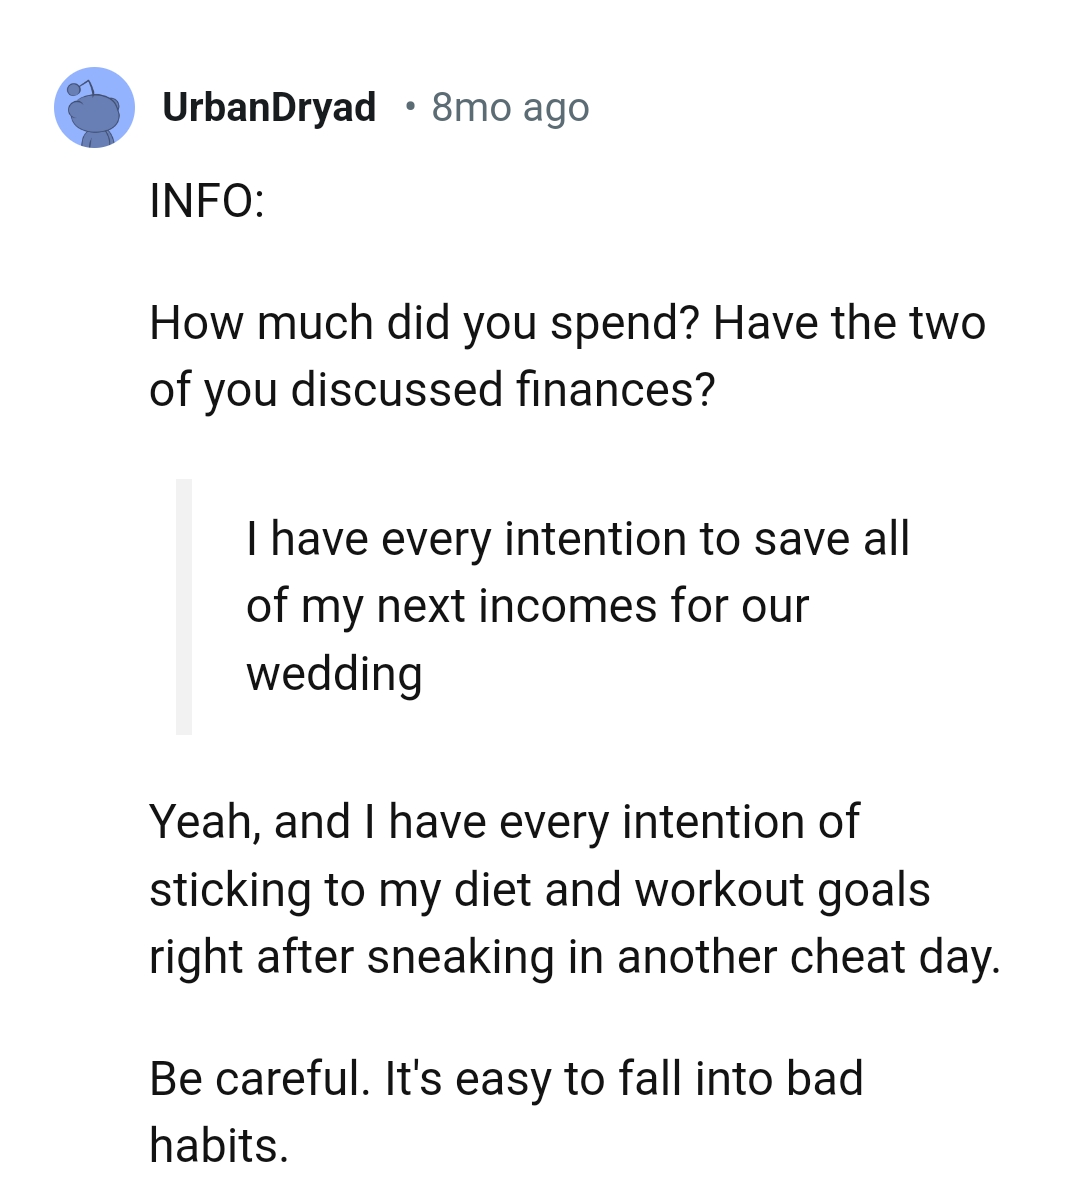 This Redditor has every intention of sticking to their diet and workout goals